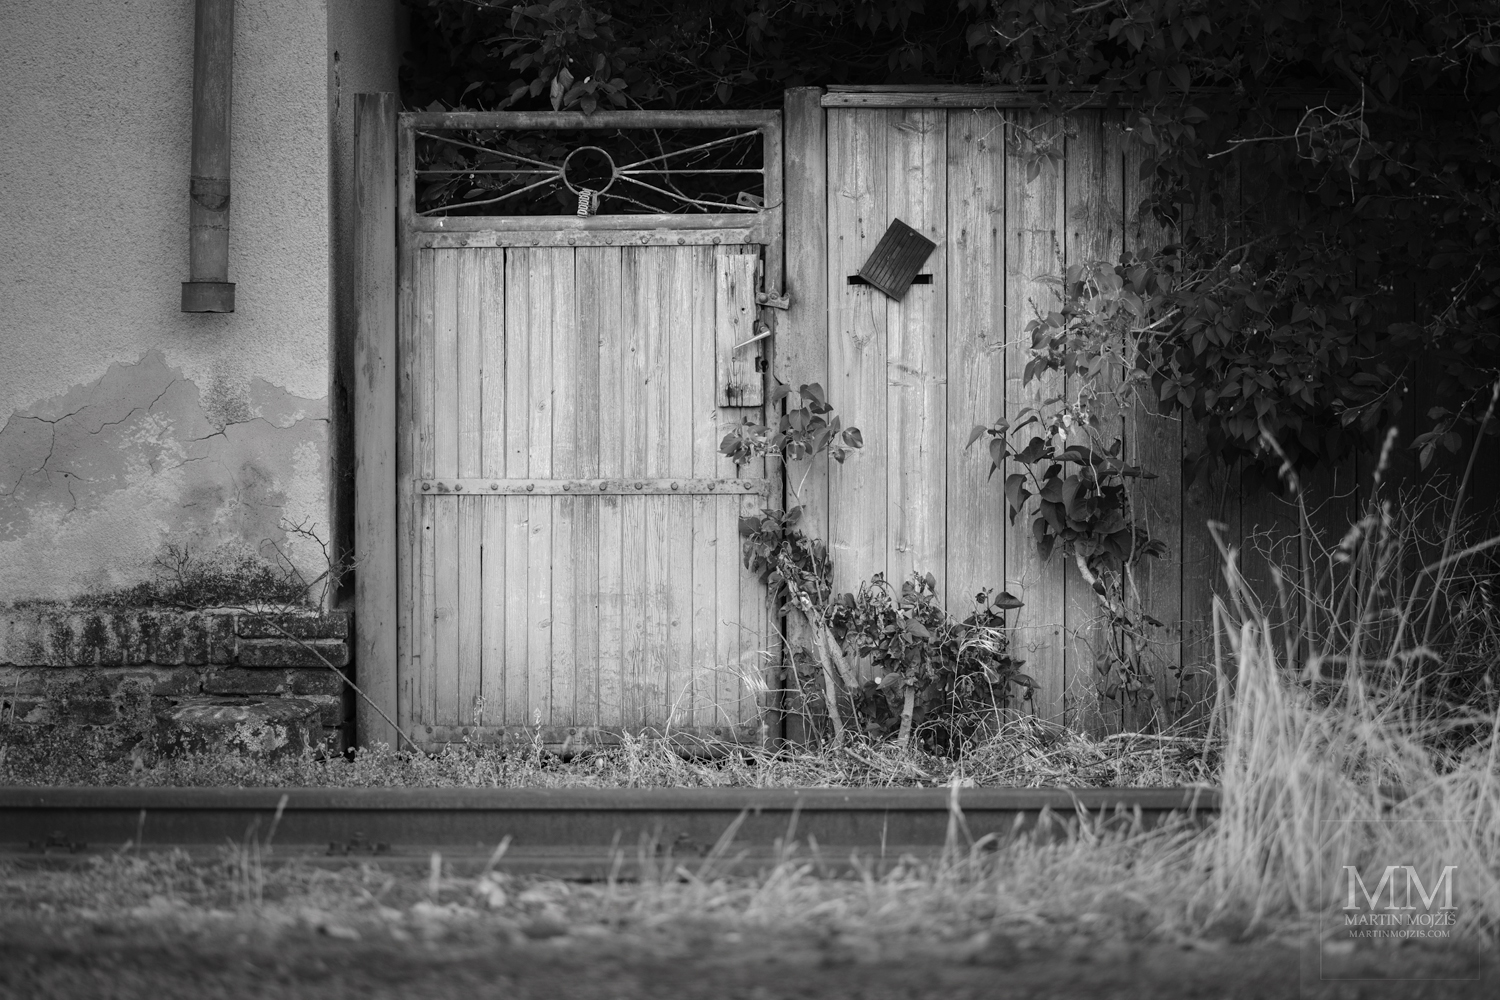 Gate to the garden by the dormitories (rails). Fine art black and white photograph IN FRONT OF THE GATE – THE RAILS, photographed by Martin Mojzis.